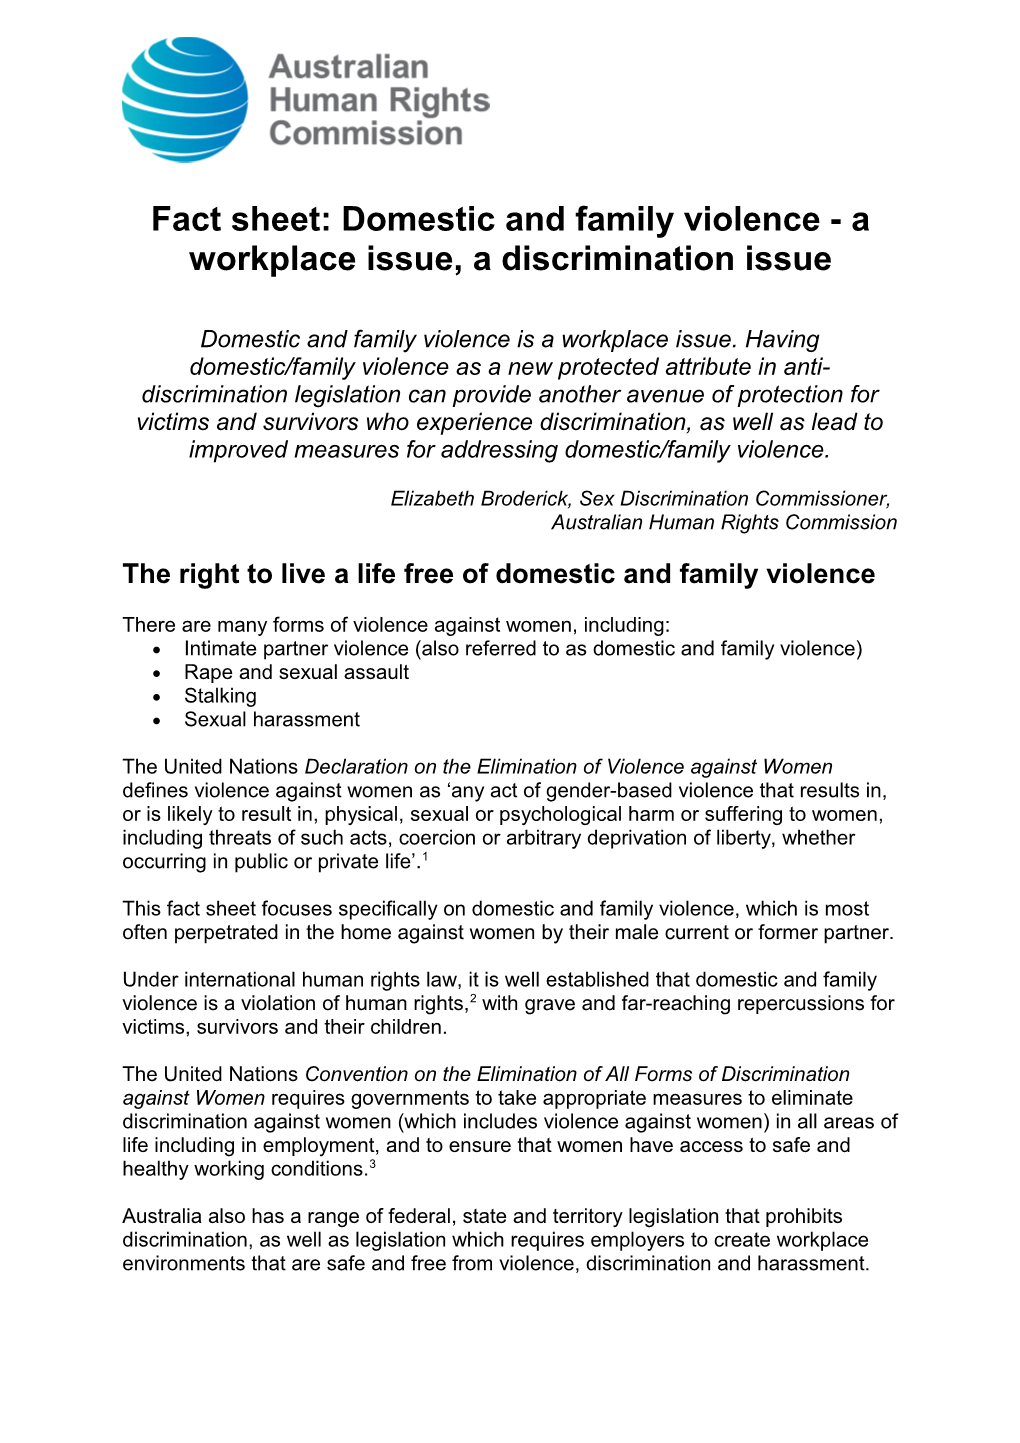 Fact Sheet: Domestic and Family Violence - Aworkplace Issue, Adiscrimination Issue